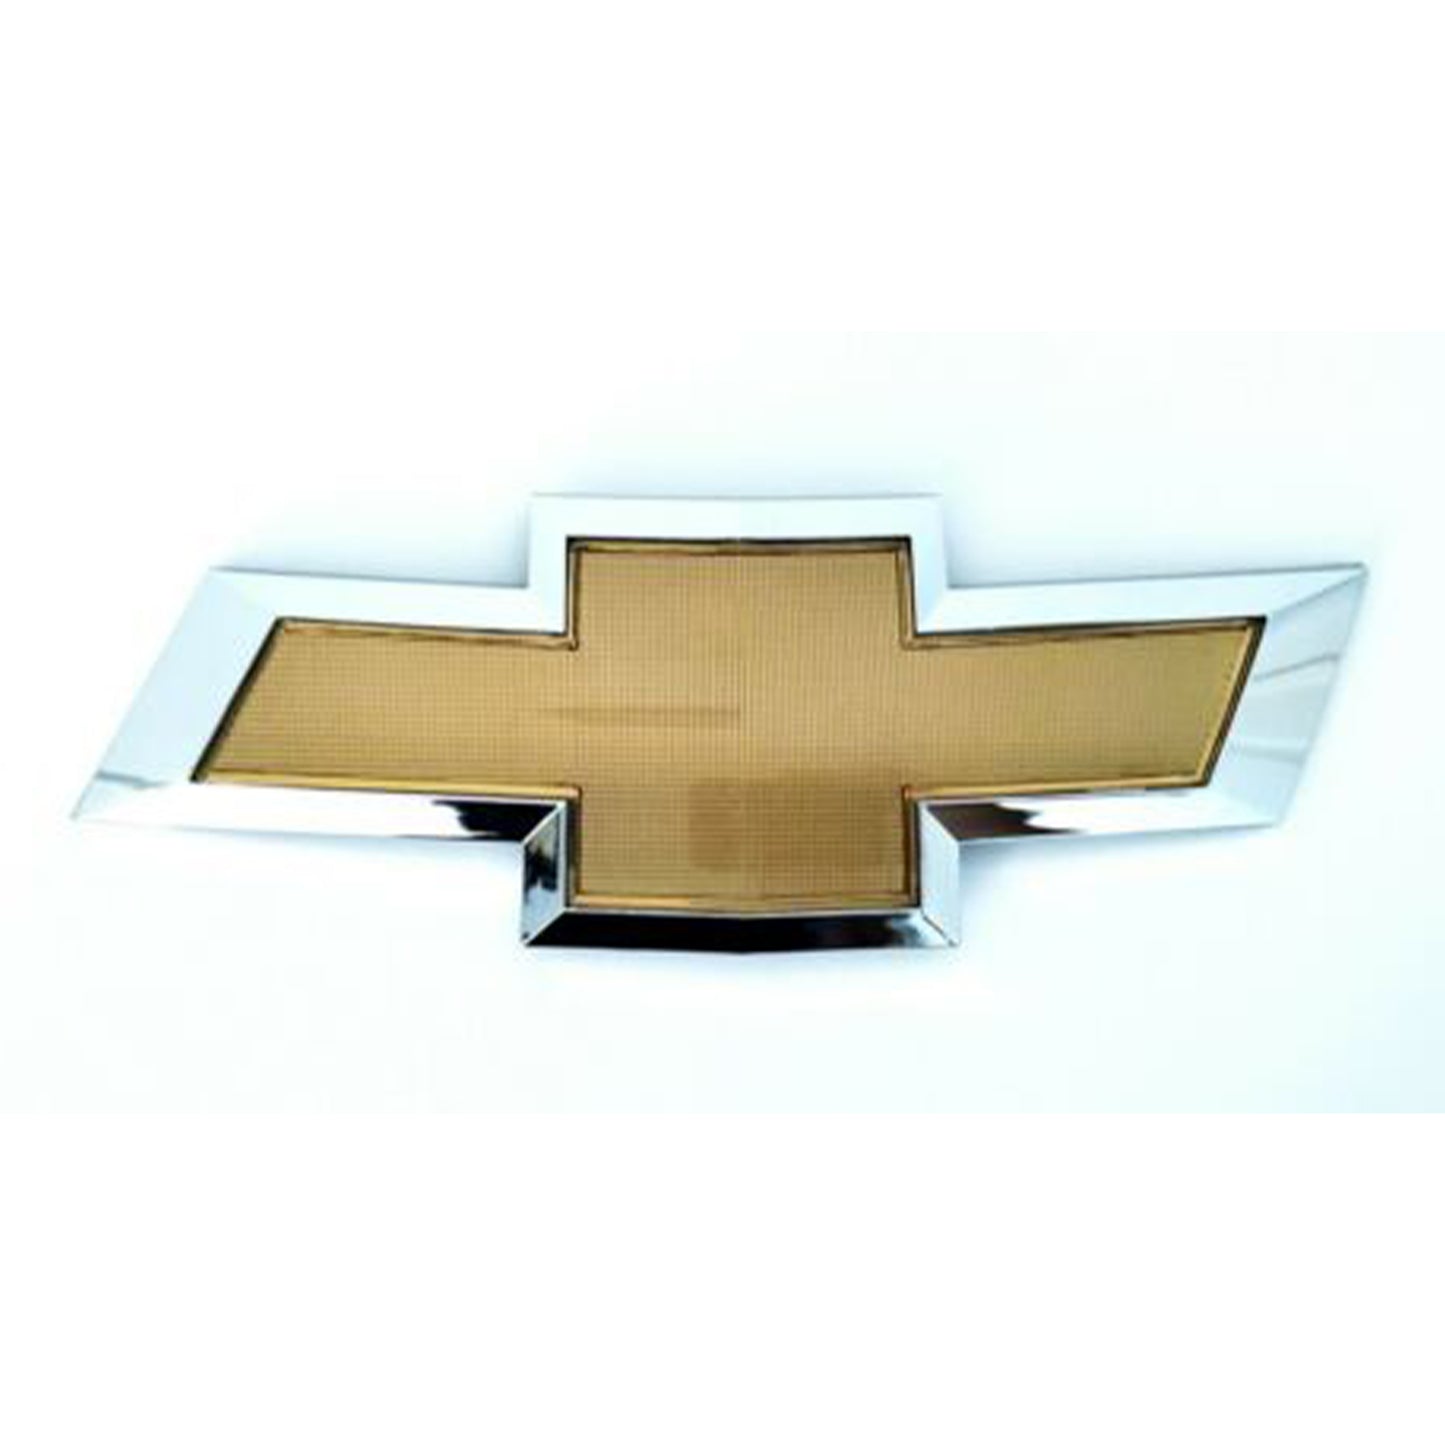 2011-2014 Chevrolet Chevy Cruze Gold Front Grille Bowtie Emblem US Shipping!